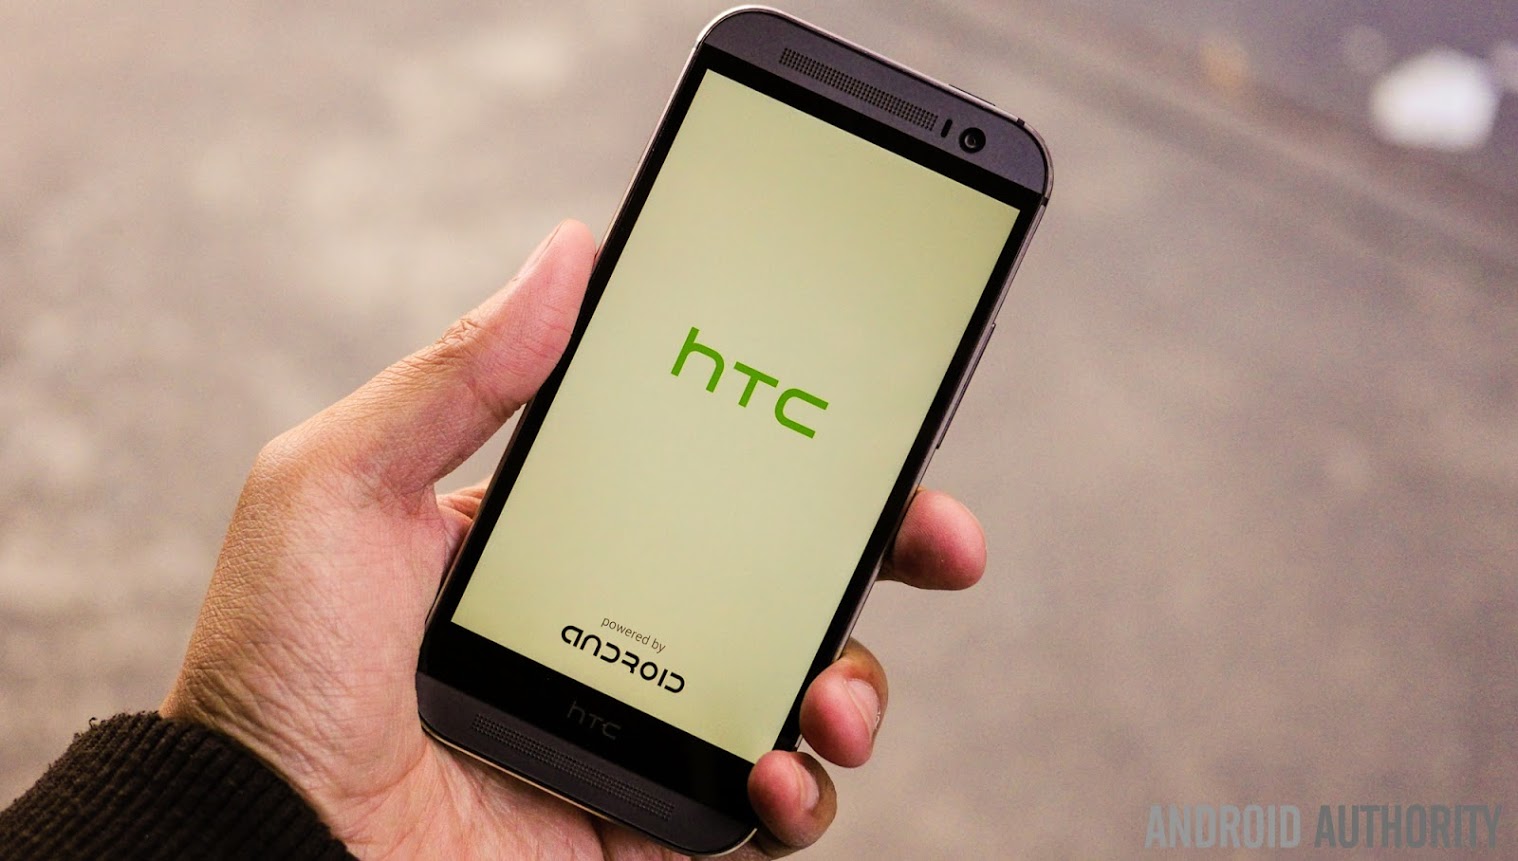 htc one m8 powered by android aa (1 of 1)